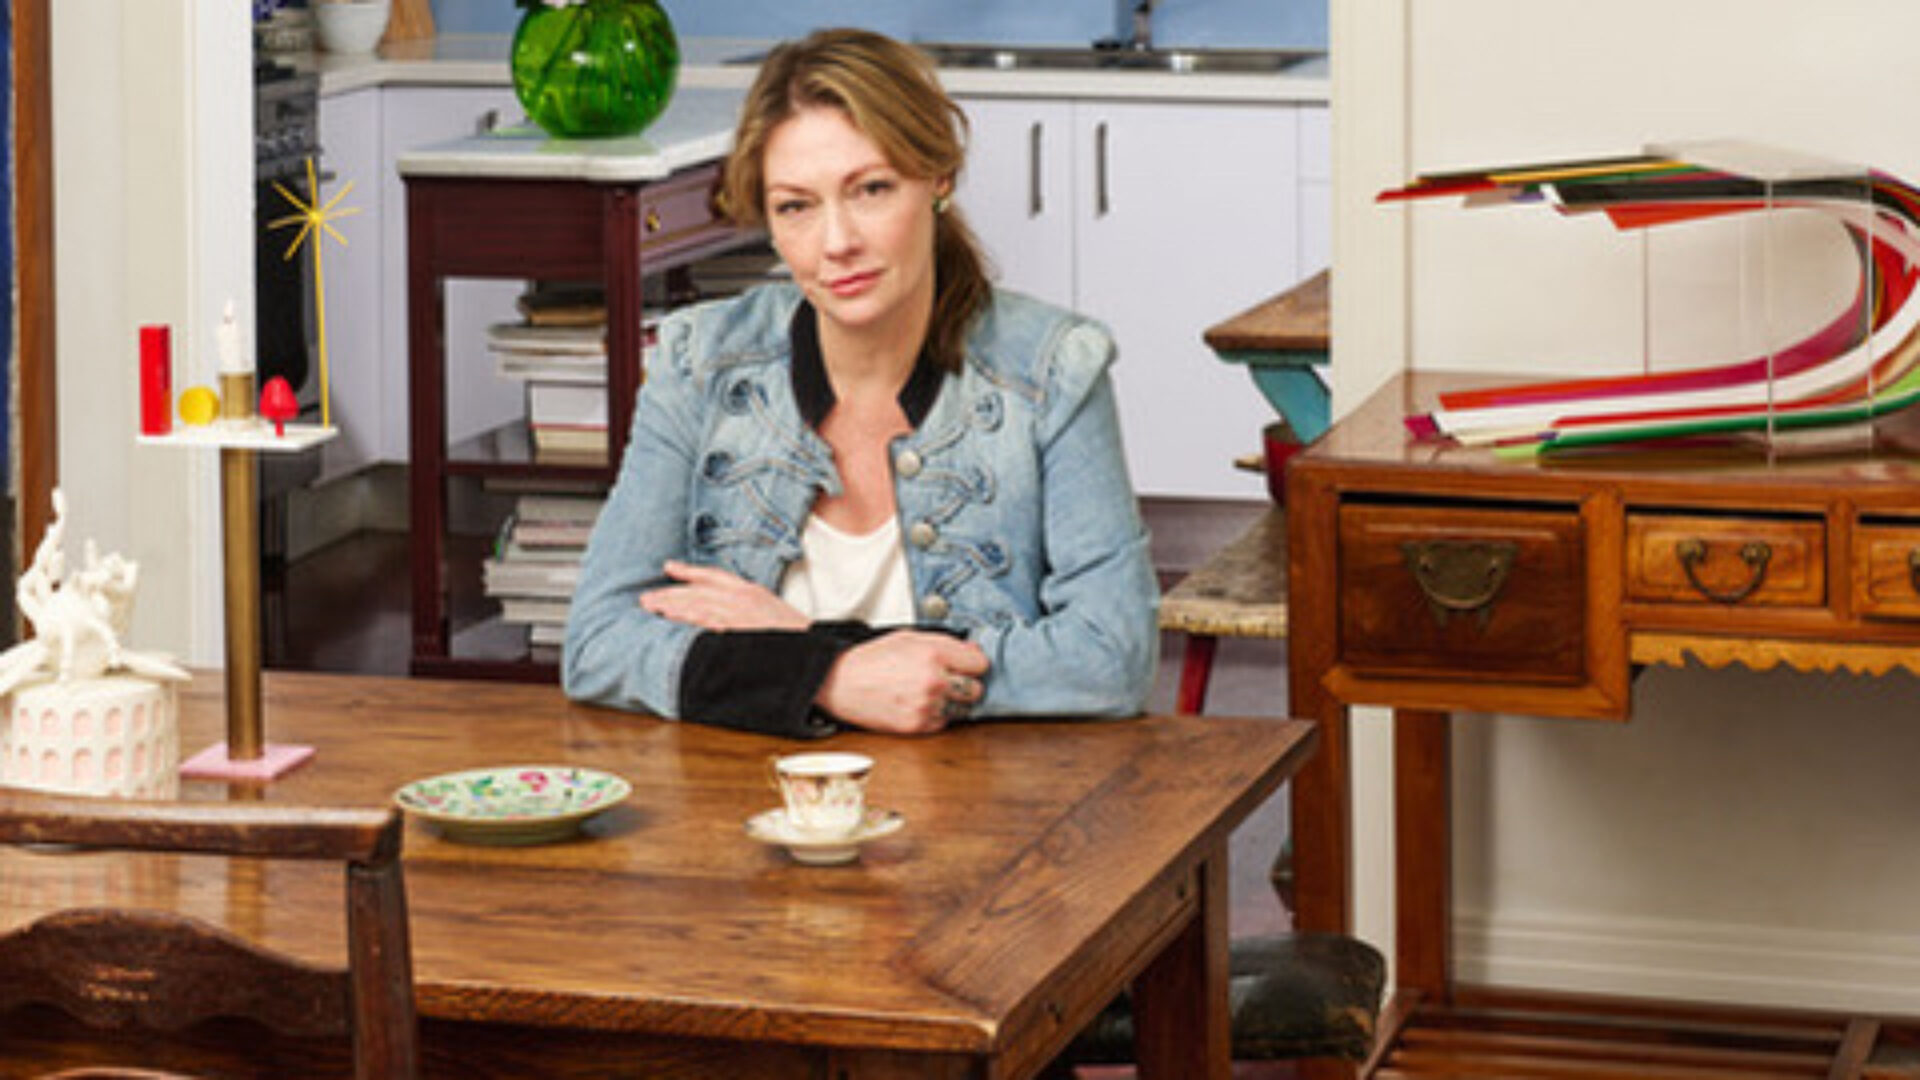 Gallerist and curator Sarah Fletcher wearing a denim jacket seated at a table surrounded by works of artists she represents